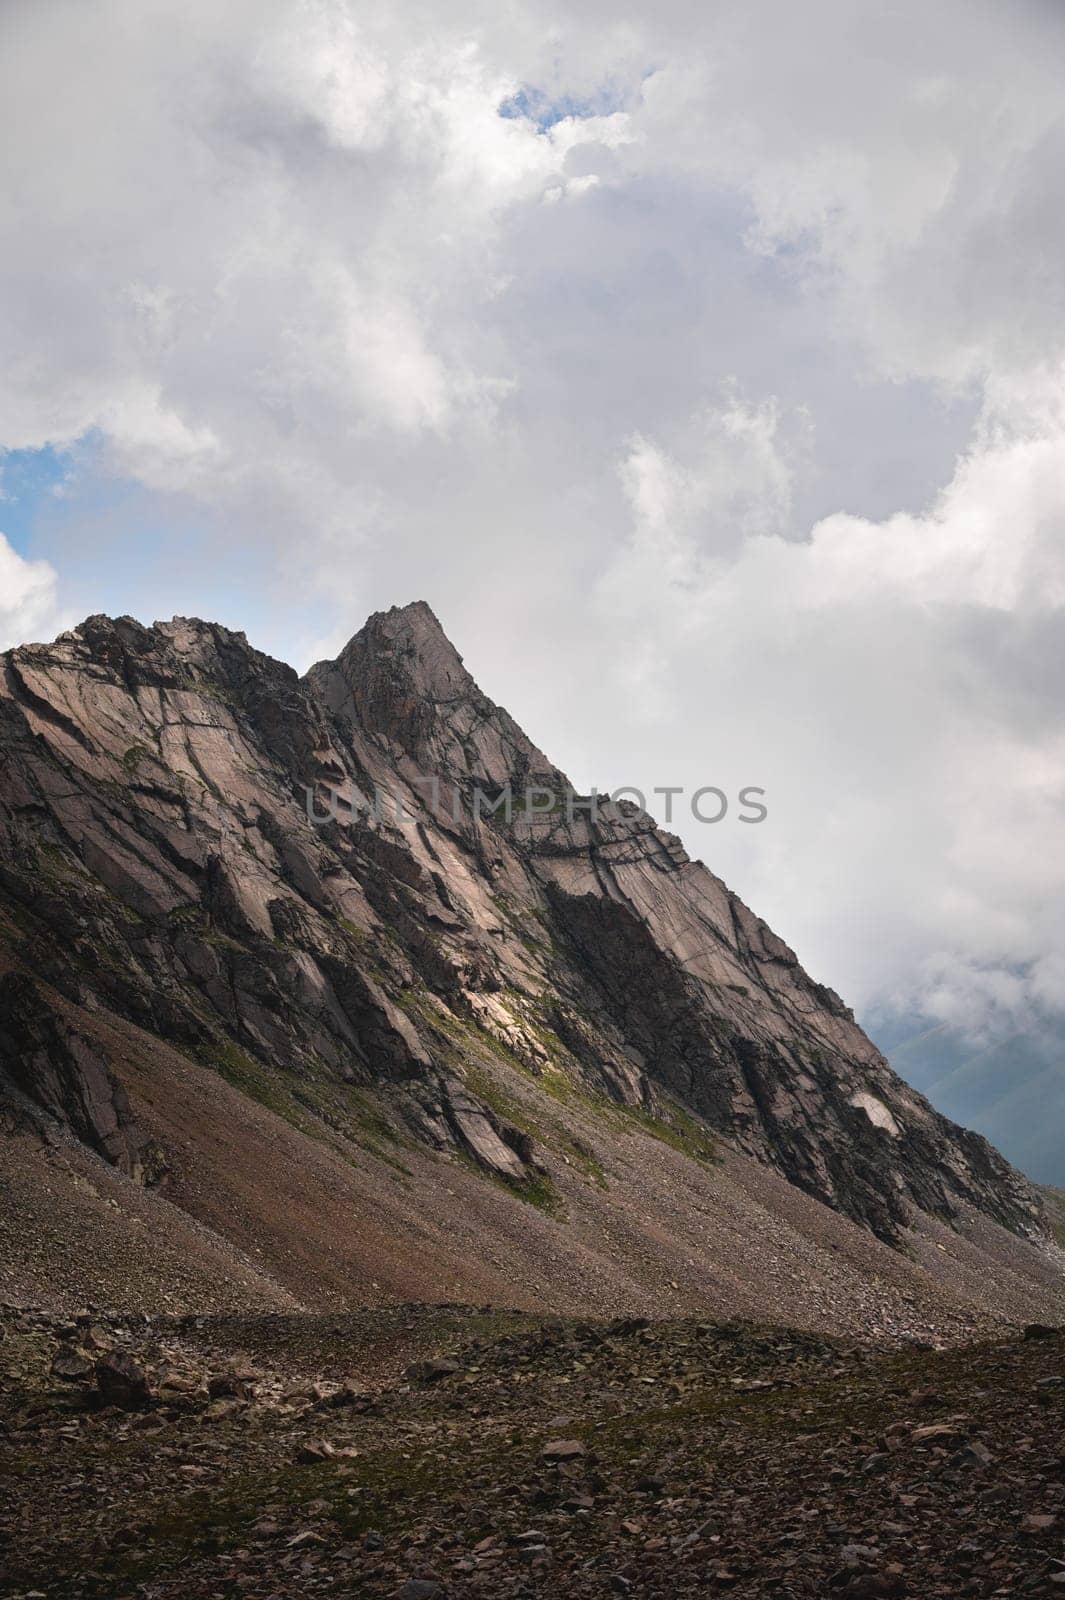 Close-up of a mountain wall at daytime against the backdrop of cumulus clouds.